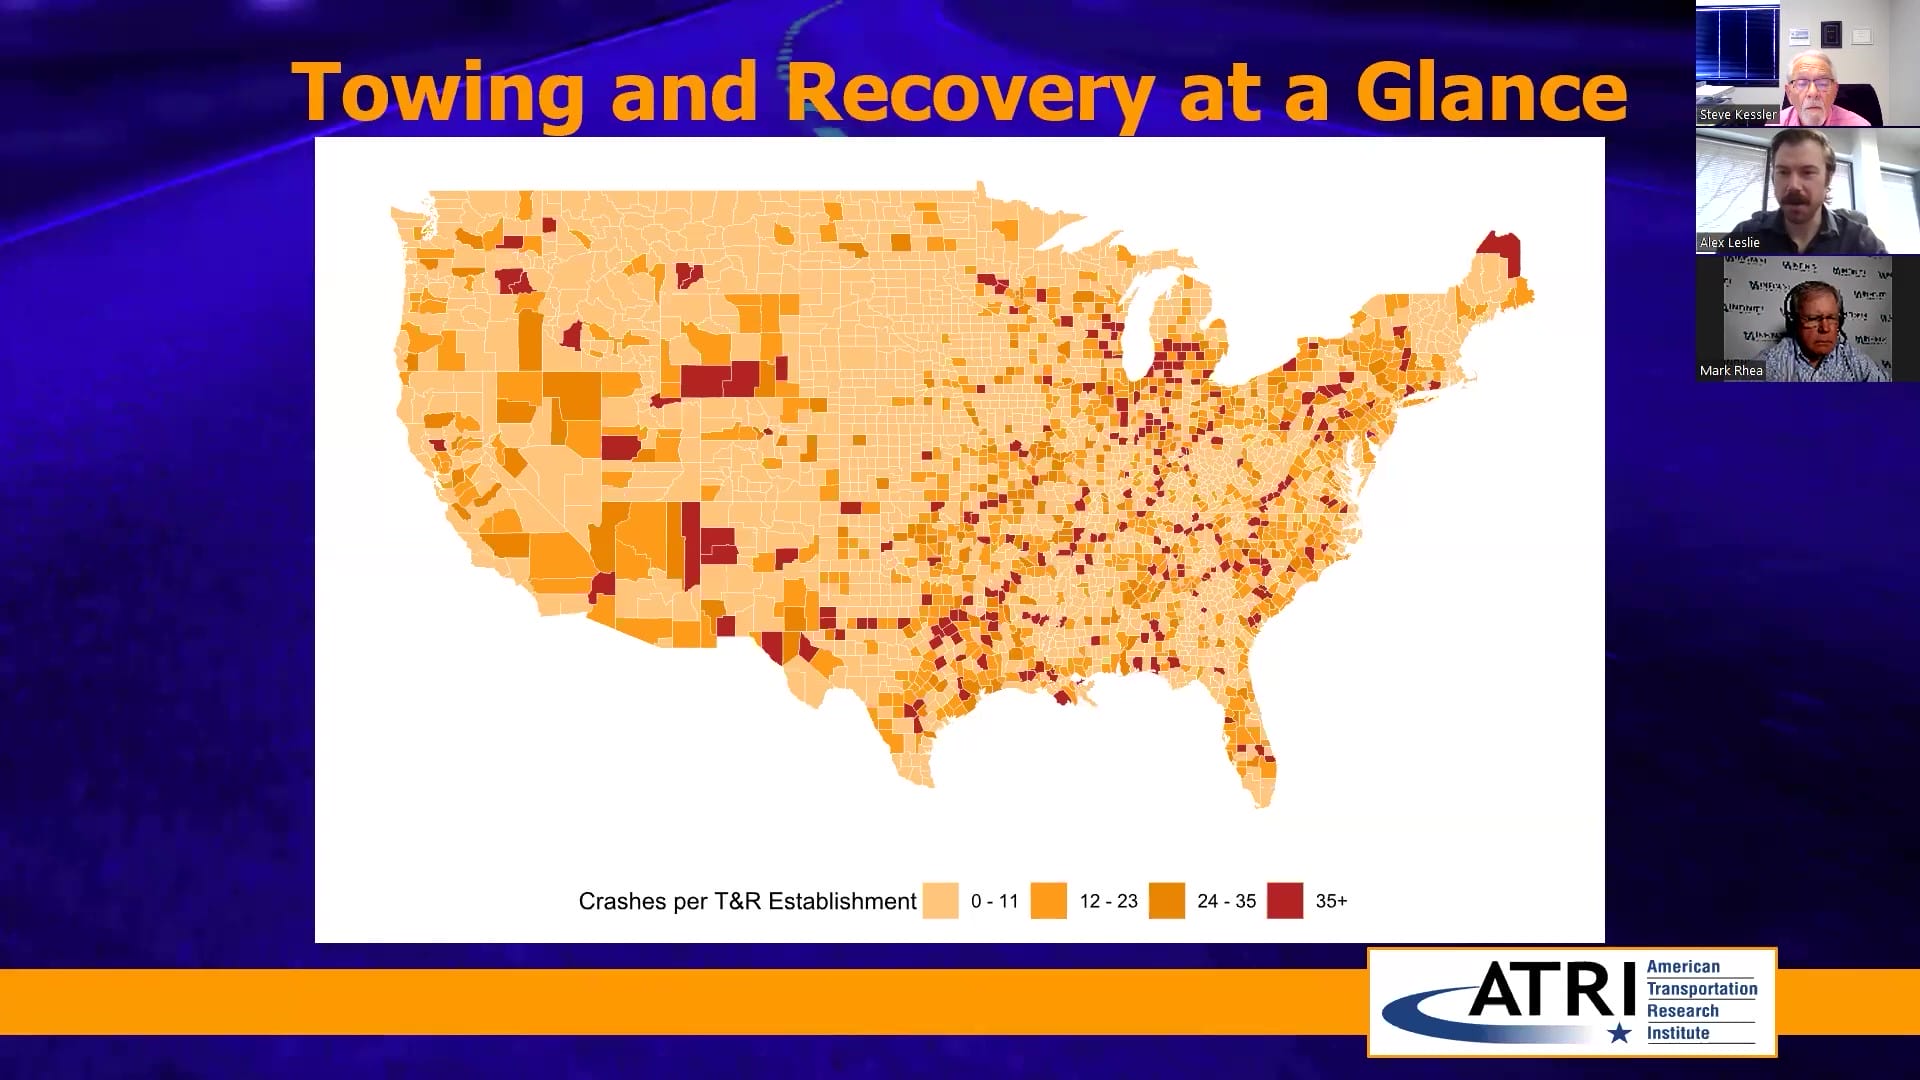 ATRI’s Research on Predatory Towing and Recovery at A Glance